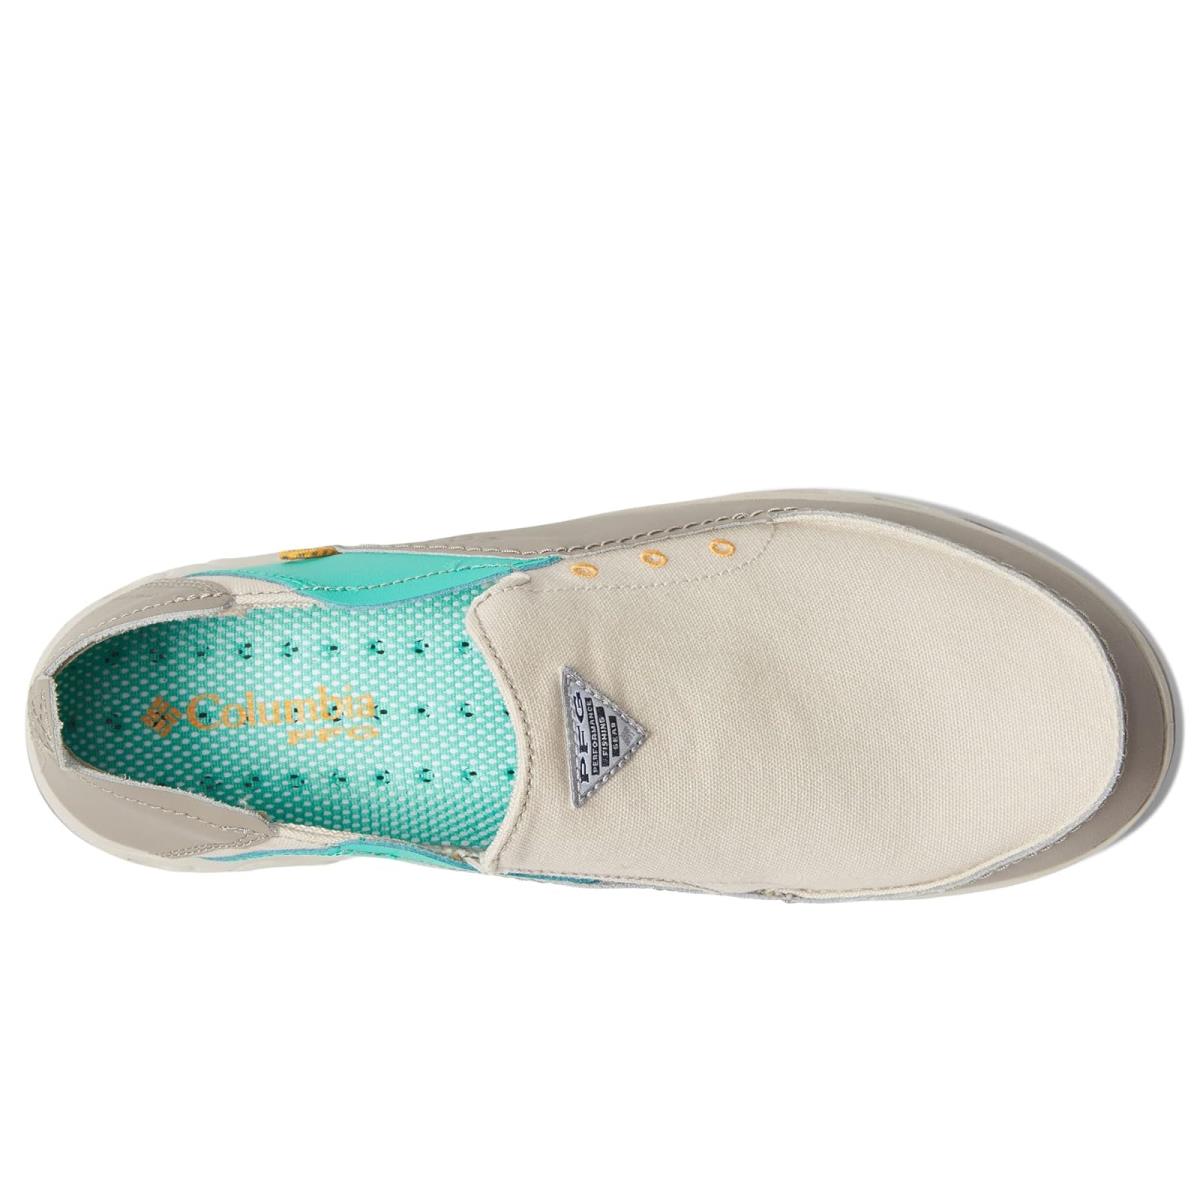 Man`s Sneakers Athletic Shoes Columbia Bahama Vent Pfg Cloud Grey/Electric Turquoise